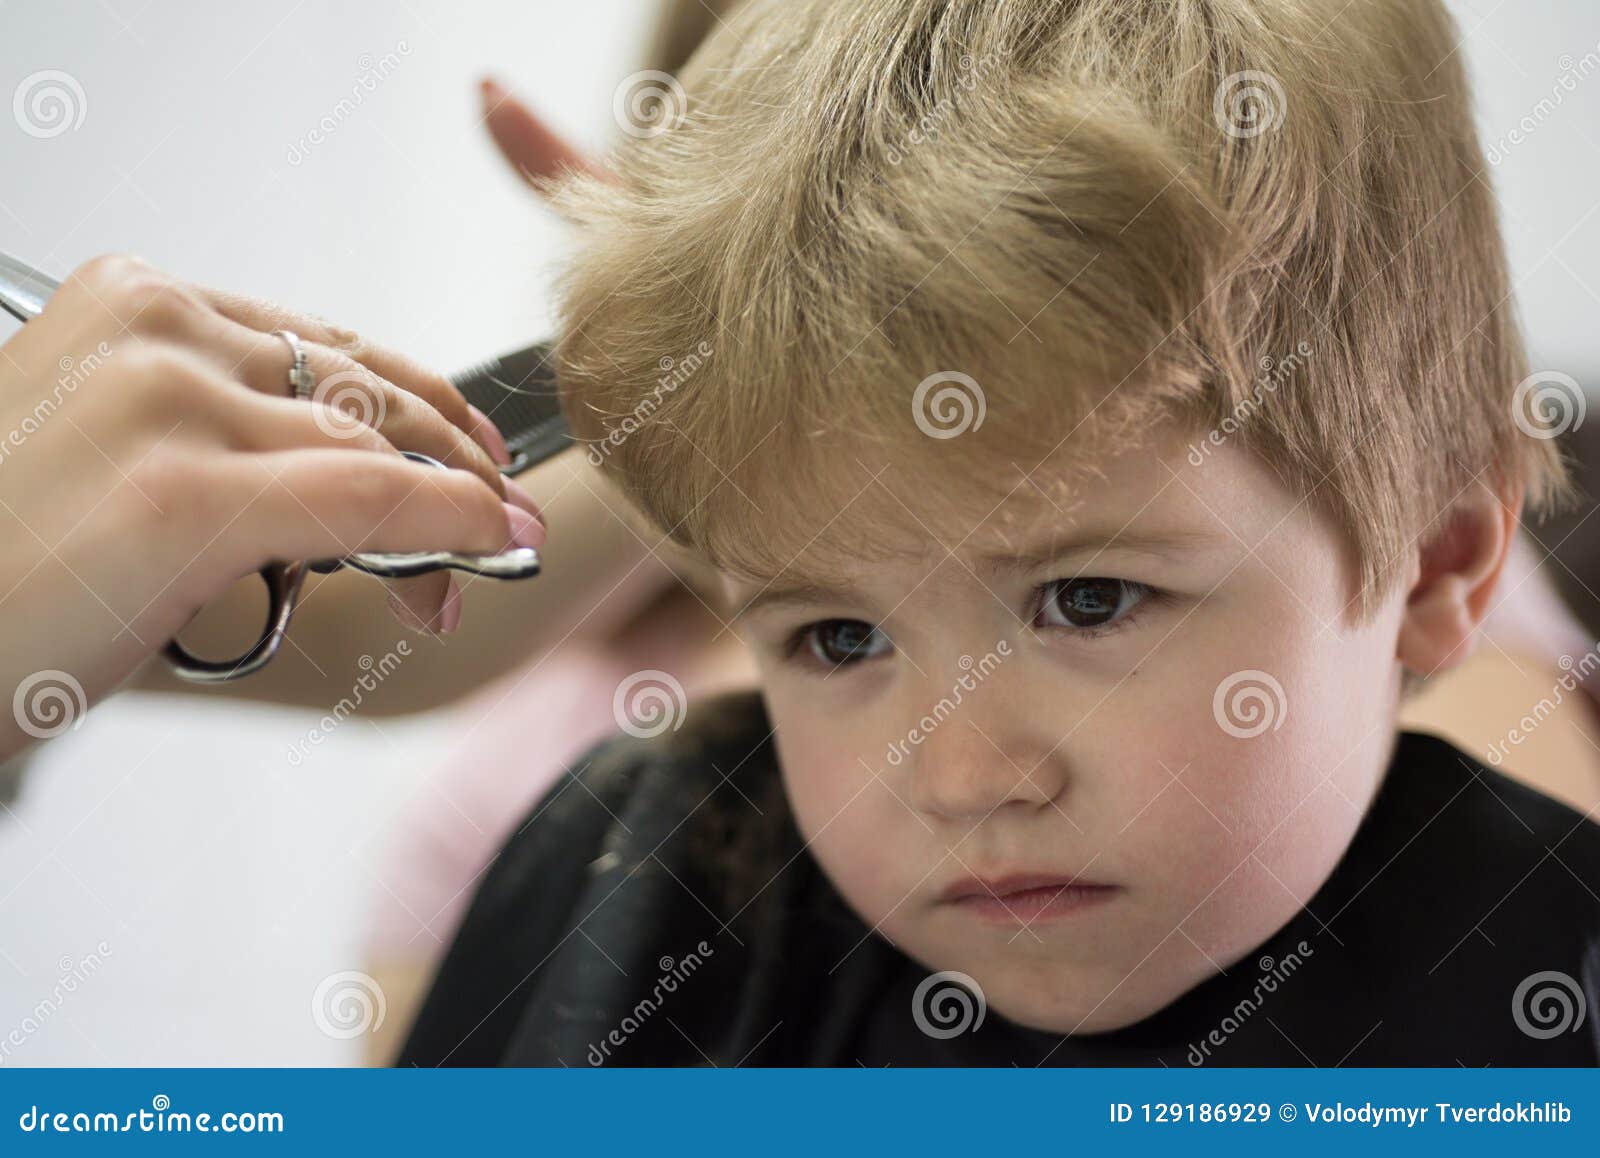 Professional Styling Cute Boys Hairstyle Little Child Given